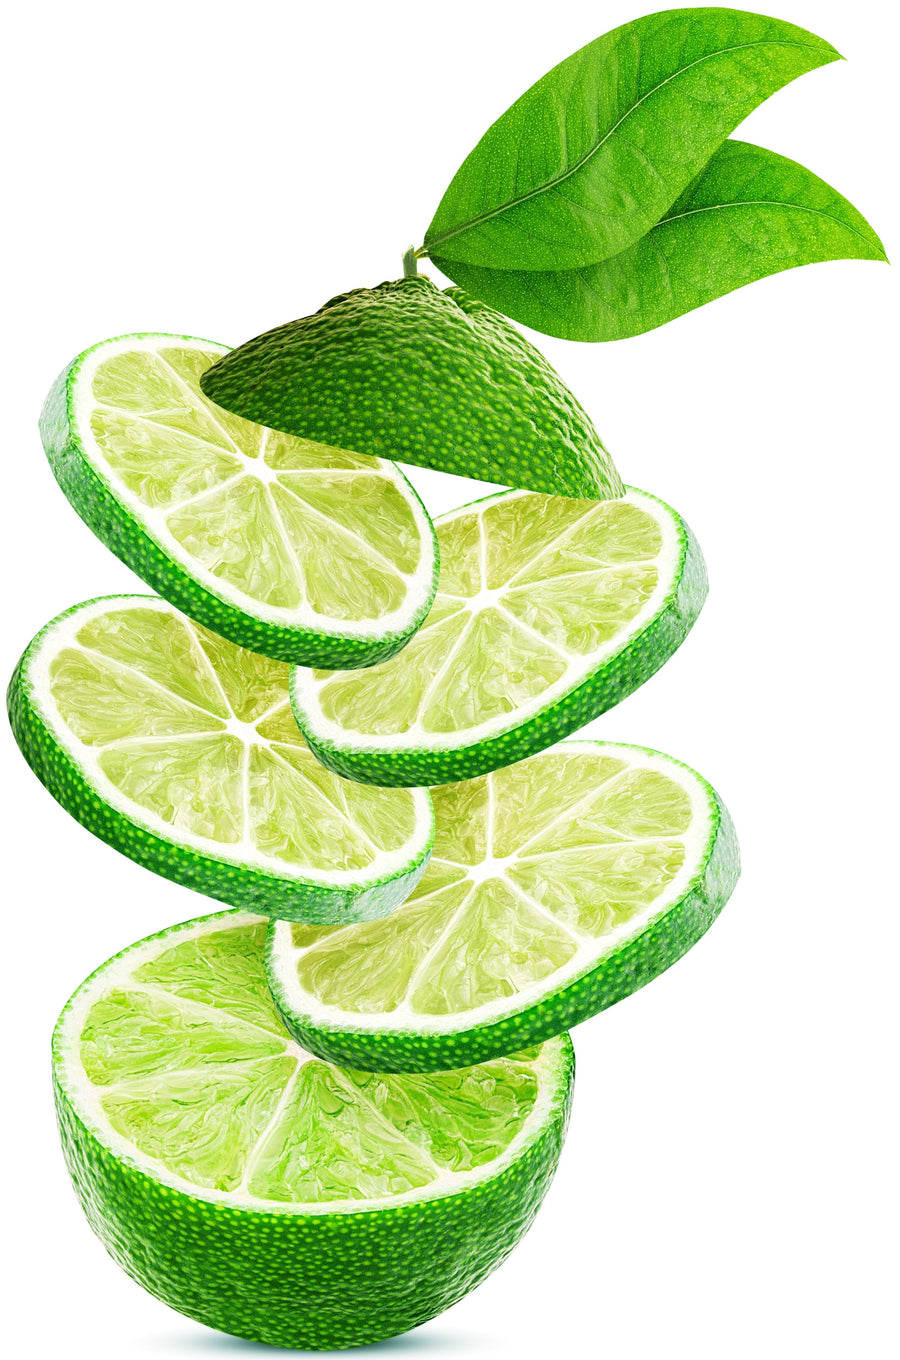 Image of slices of lime falling down on top of half a lime